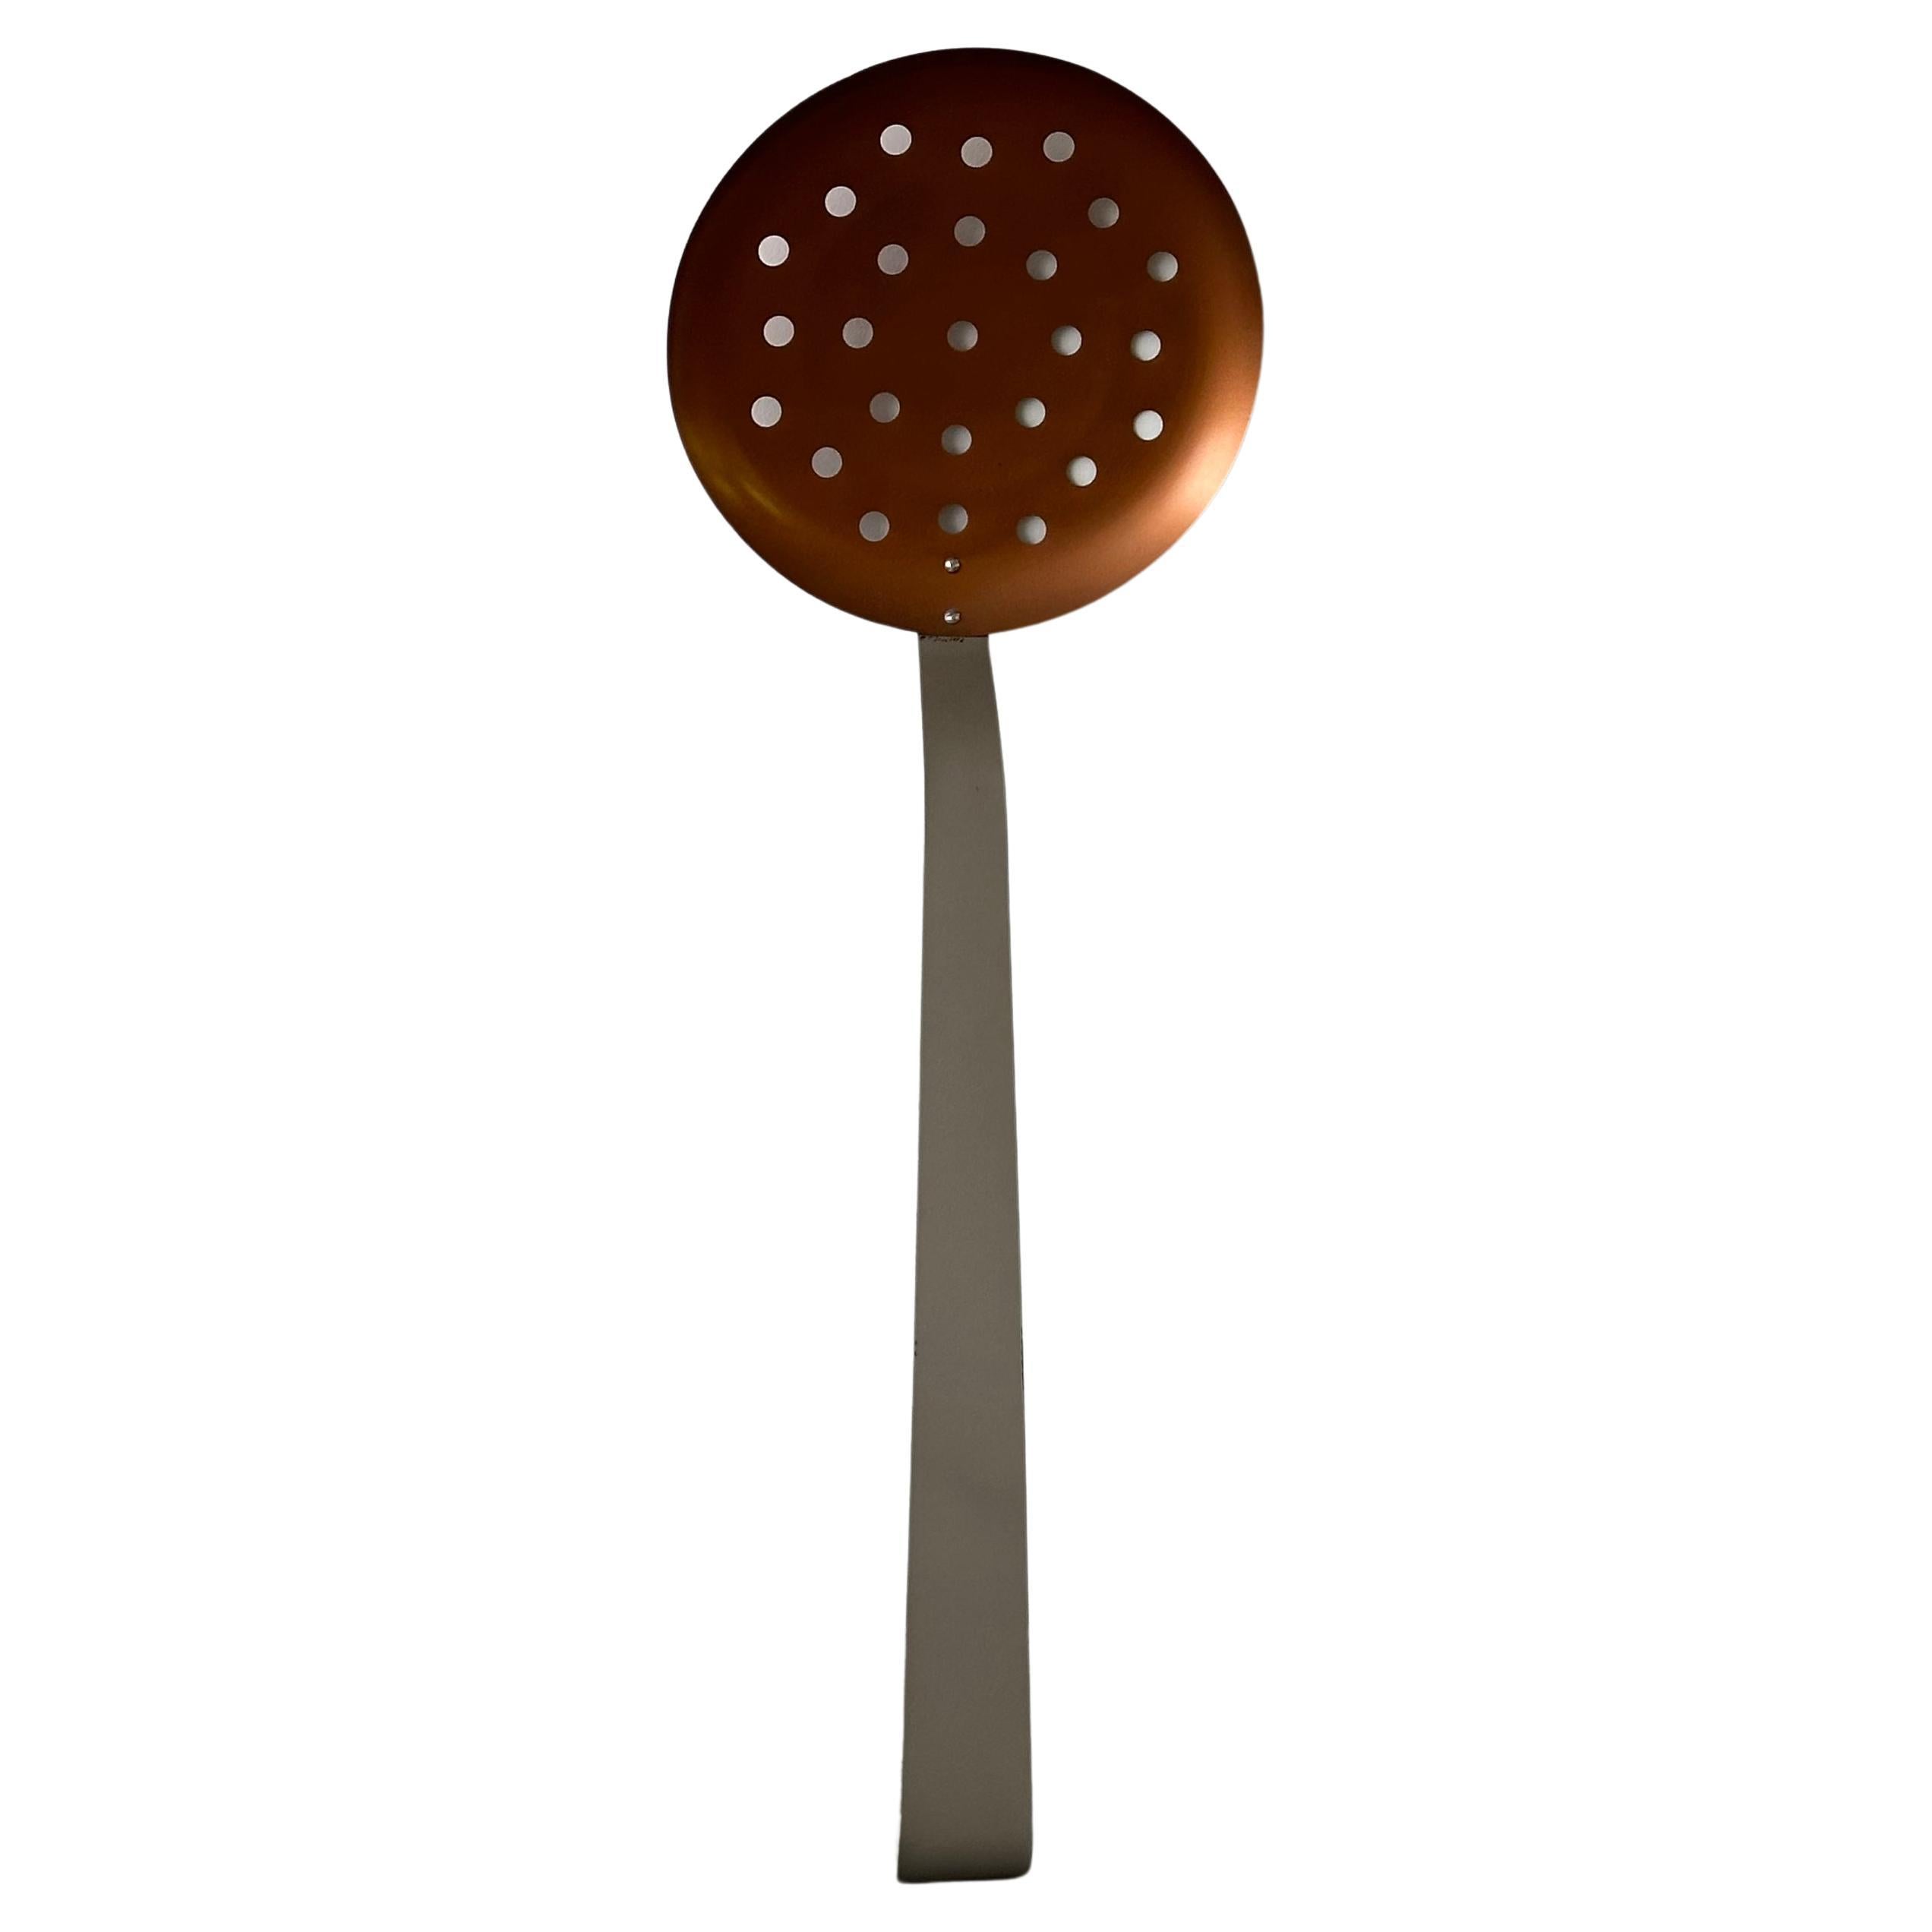 Curtis Jere Pop Art Slotted Spoon